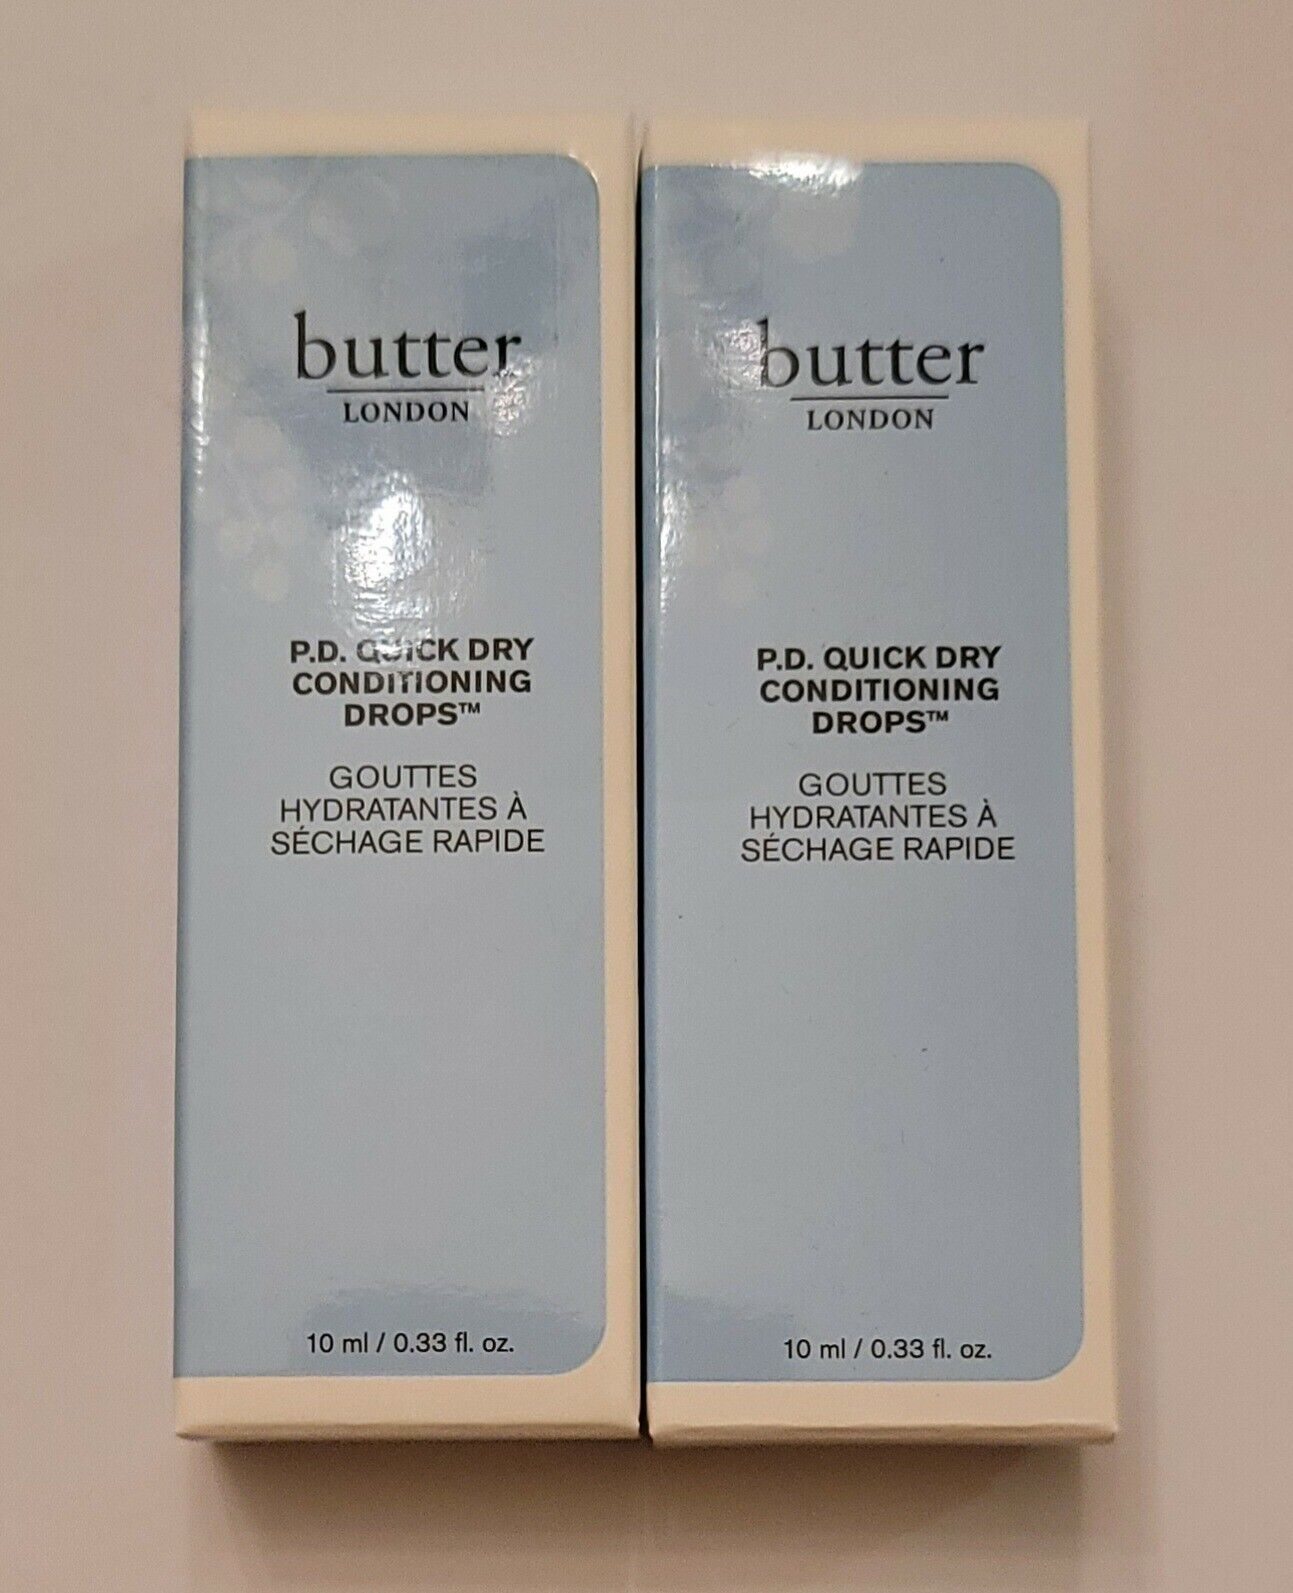 2 Butter London P.d. Quick Dry Nail Conditioning Drops Dry Oil Serum. Nib